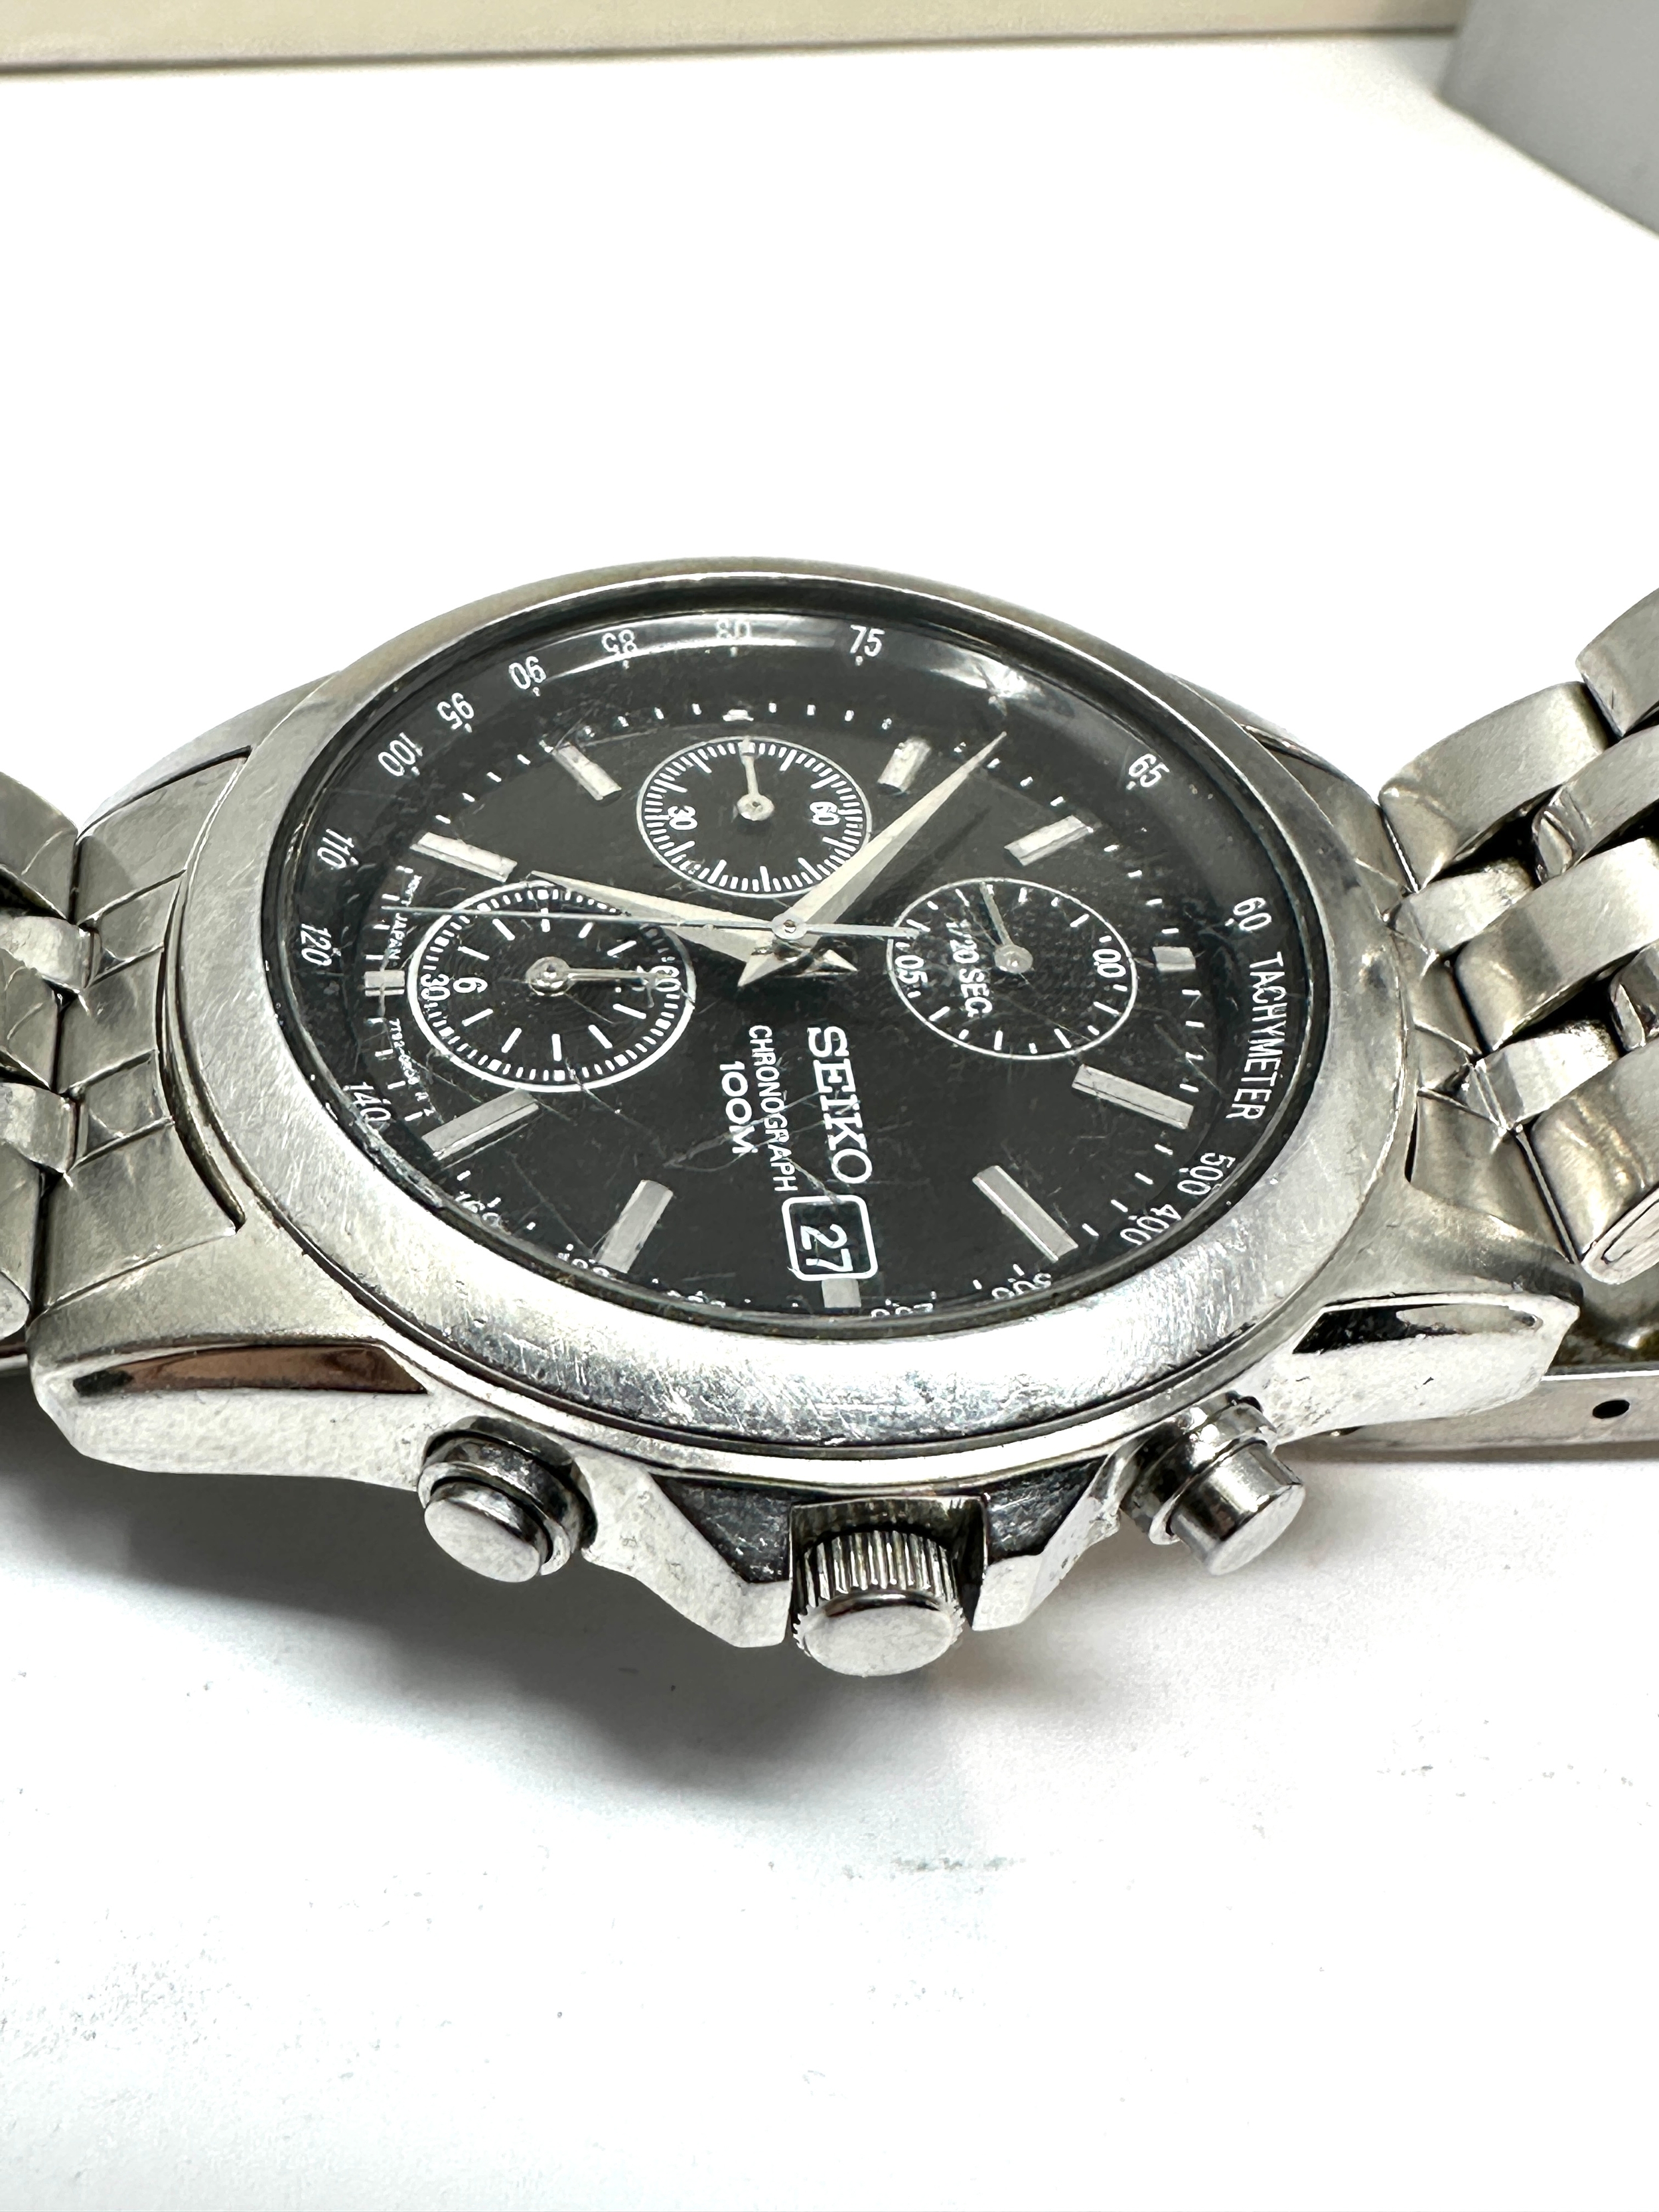 Boxed seiko chronograph 1000m gents quartz wristwatch boxed with booklet spare strap parts - Image 3 of 5